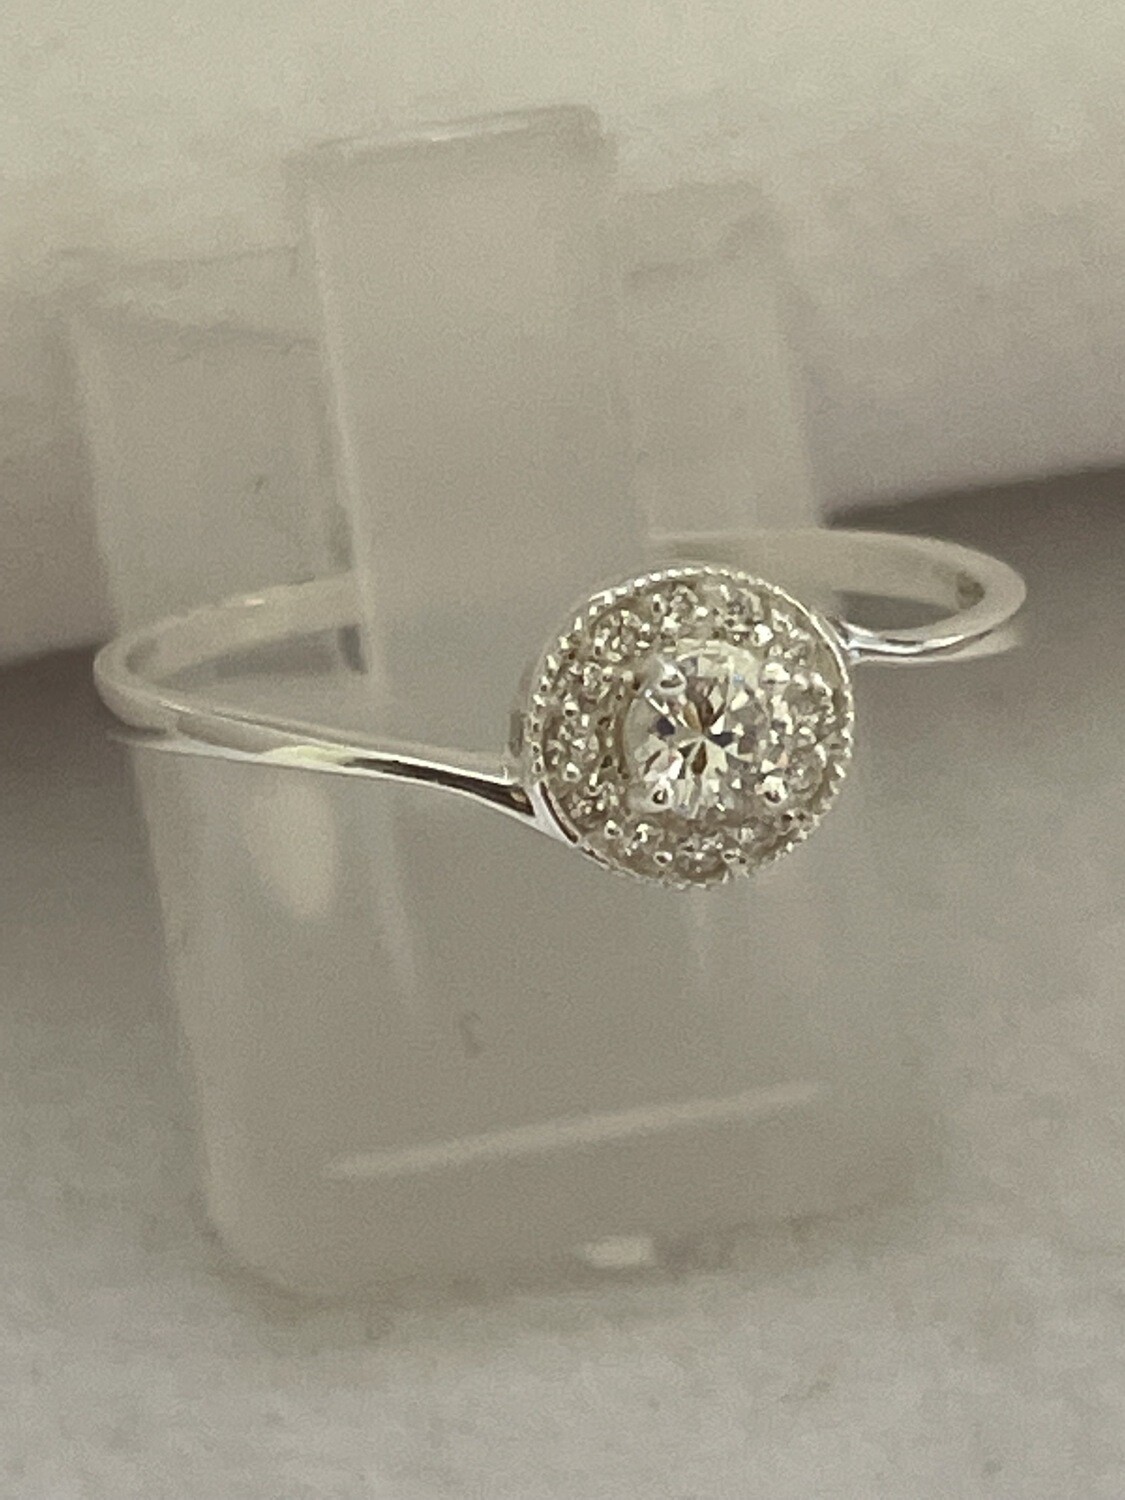 Fancy Ring with small CZ stones